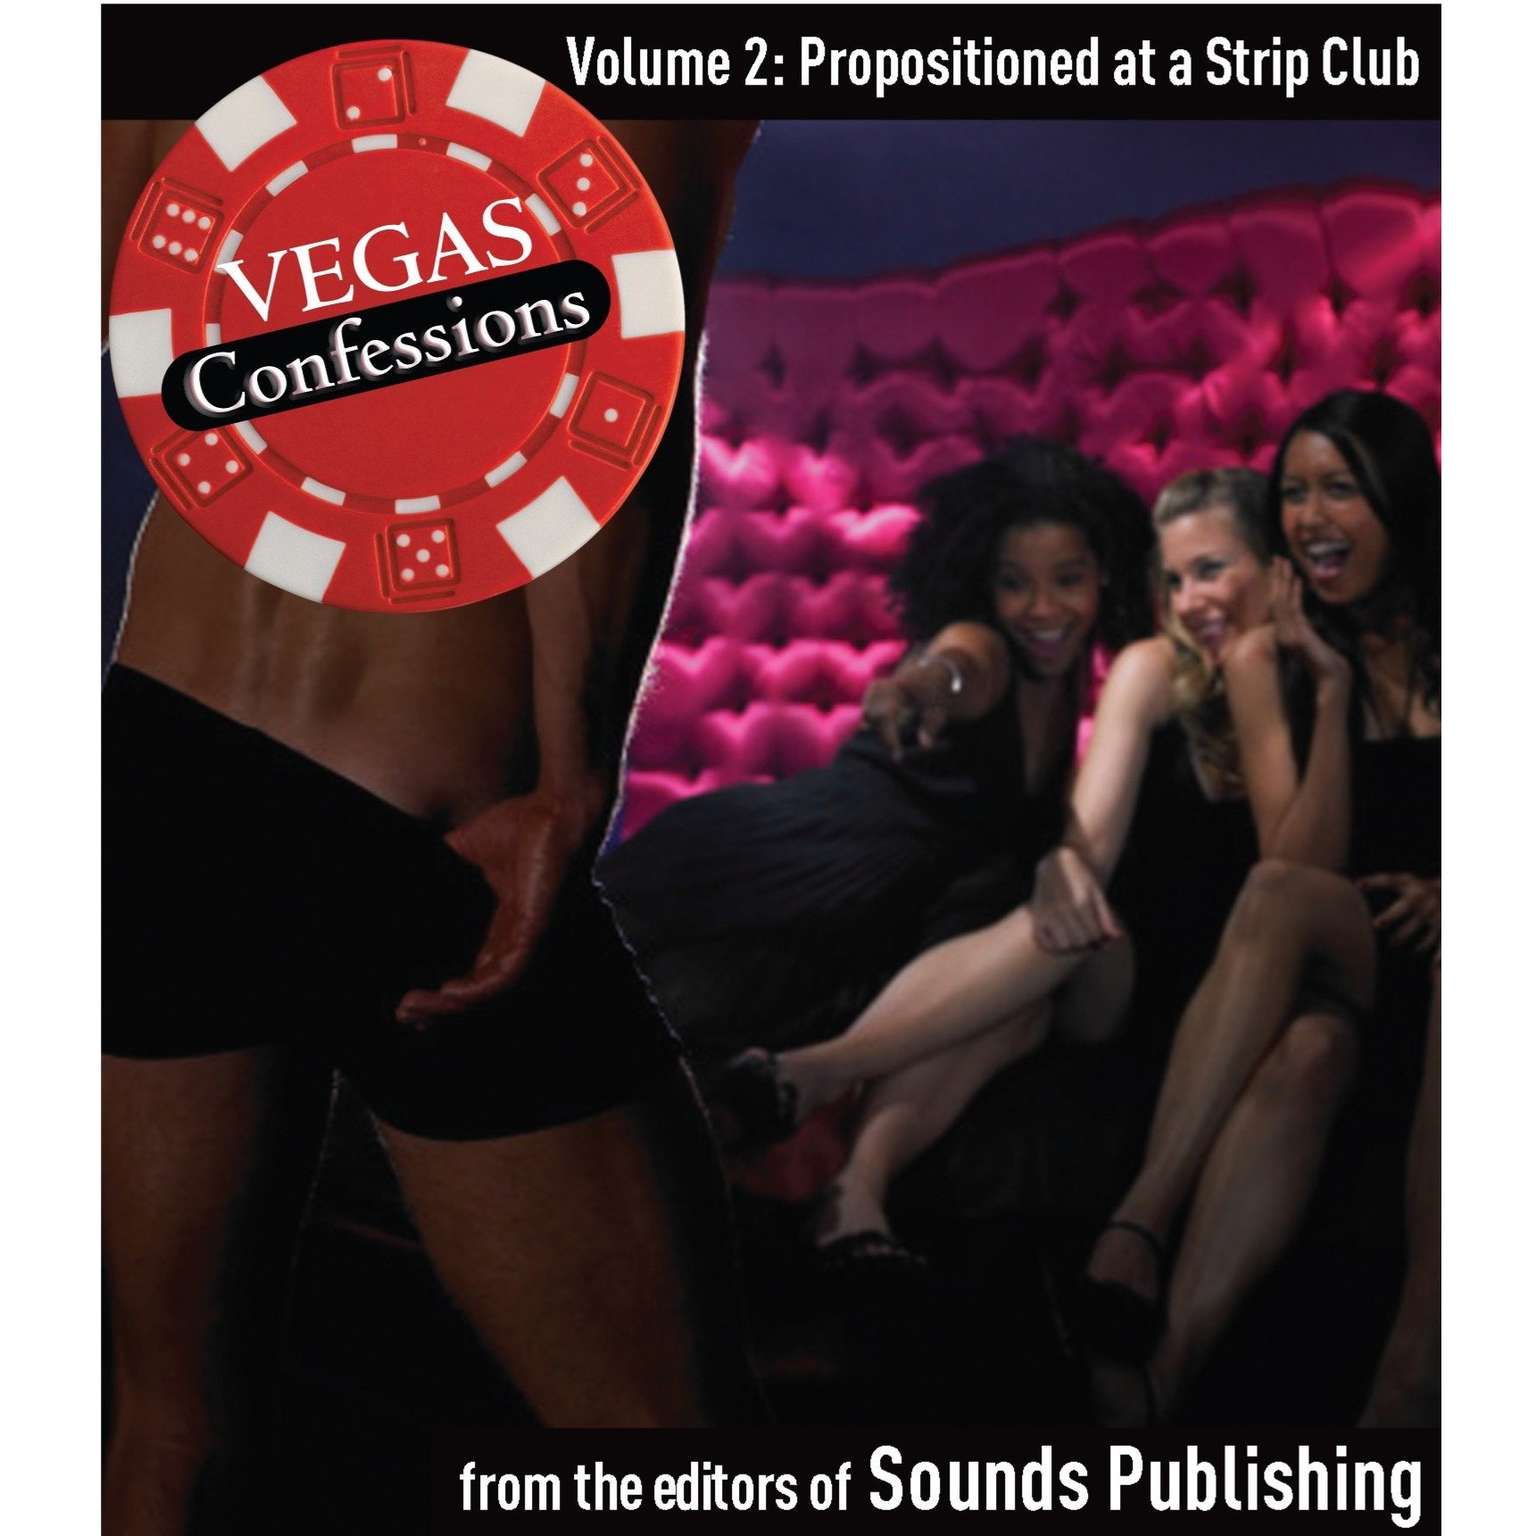 Vegas Confessions 2: Propositioned at a Strip Club Audiobook, by The Editors of Sounds Publishing